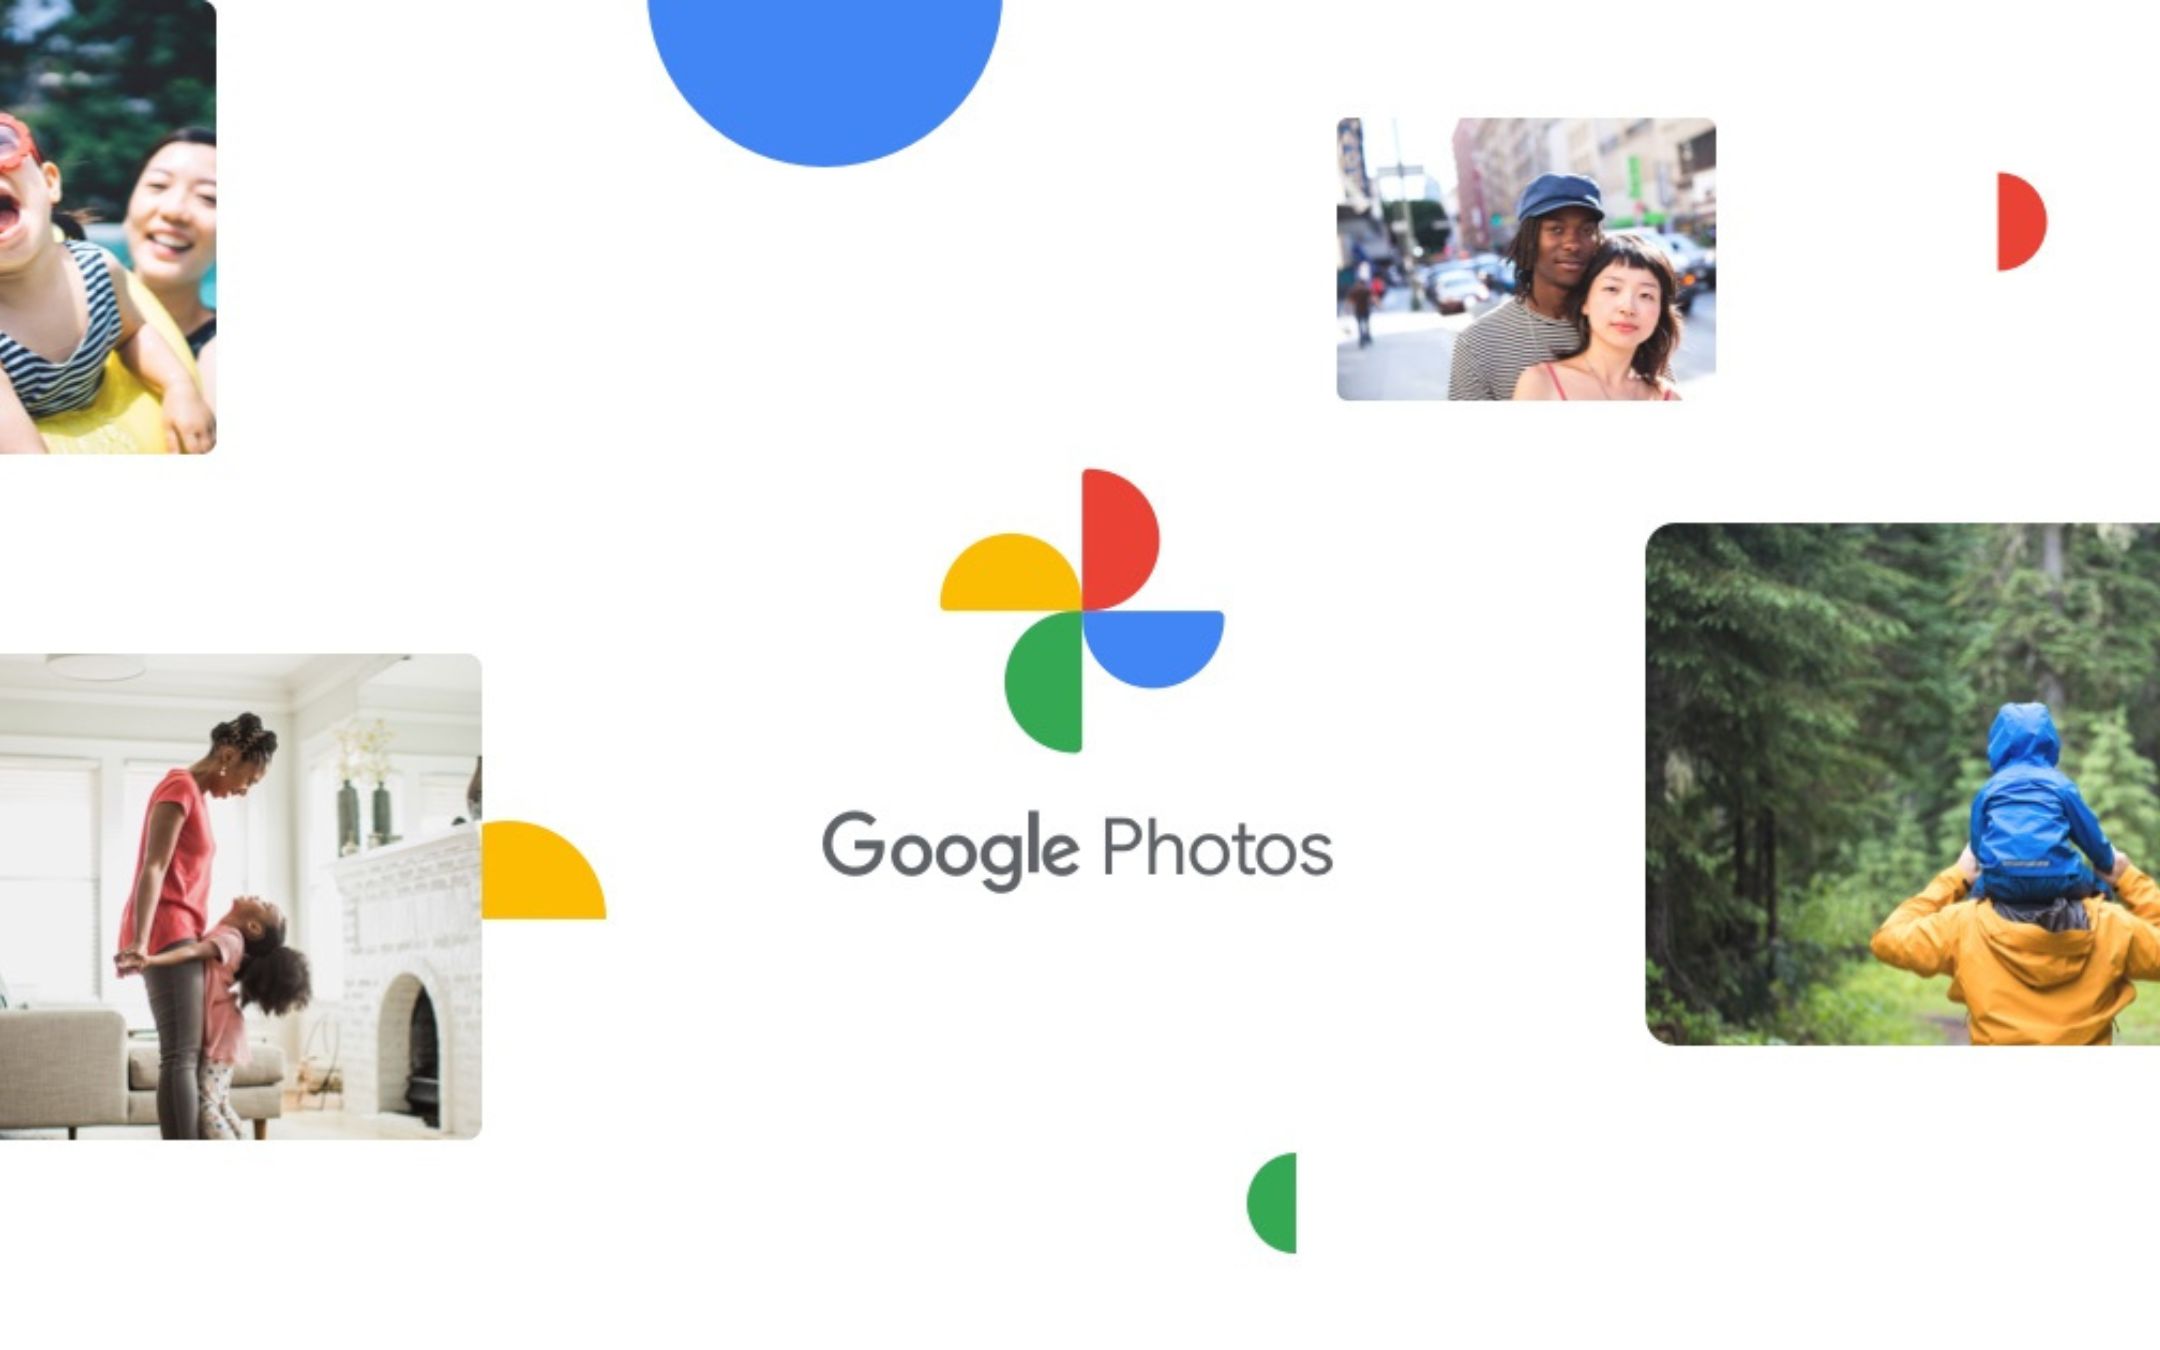 Google Photos, Pixel users will be able to create cinematic photos